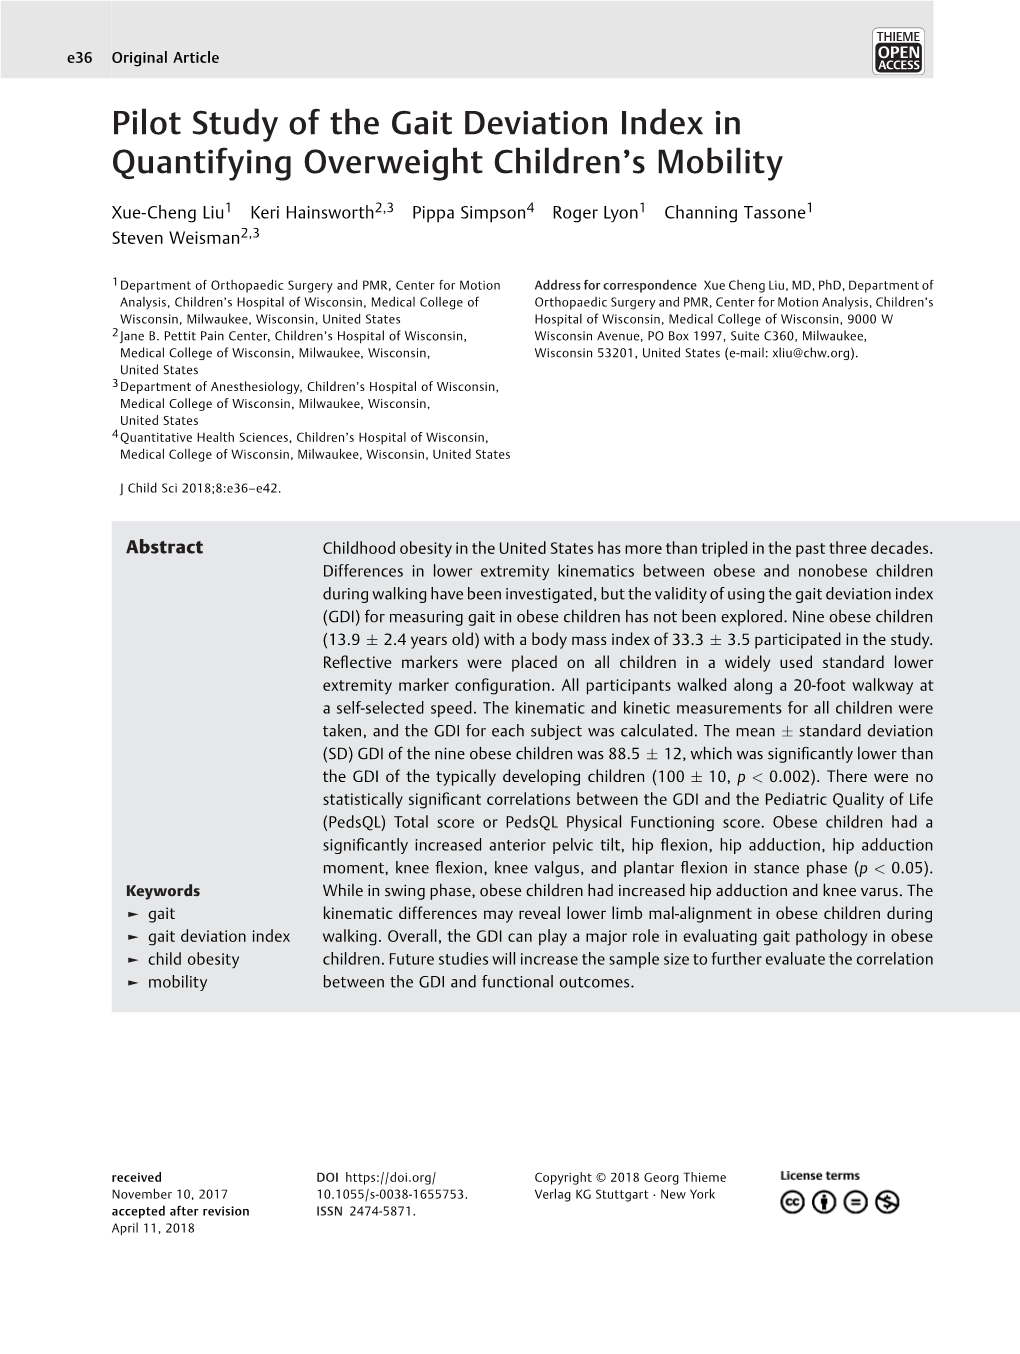 Pilot Study of the Gait Deviation Index in Quantifying Overweight Children’S Mobility